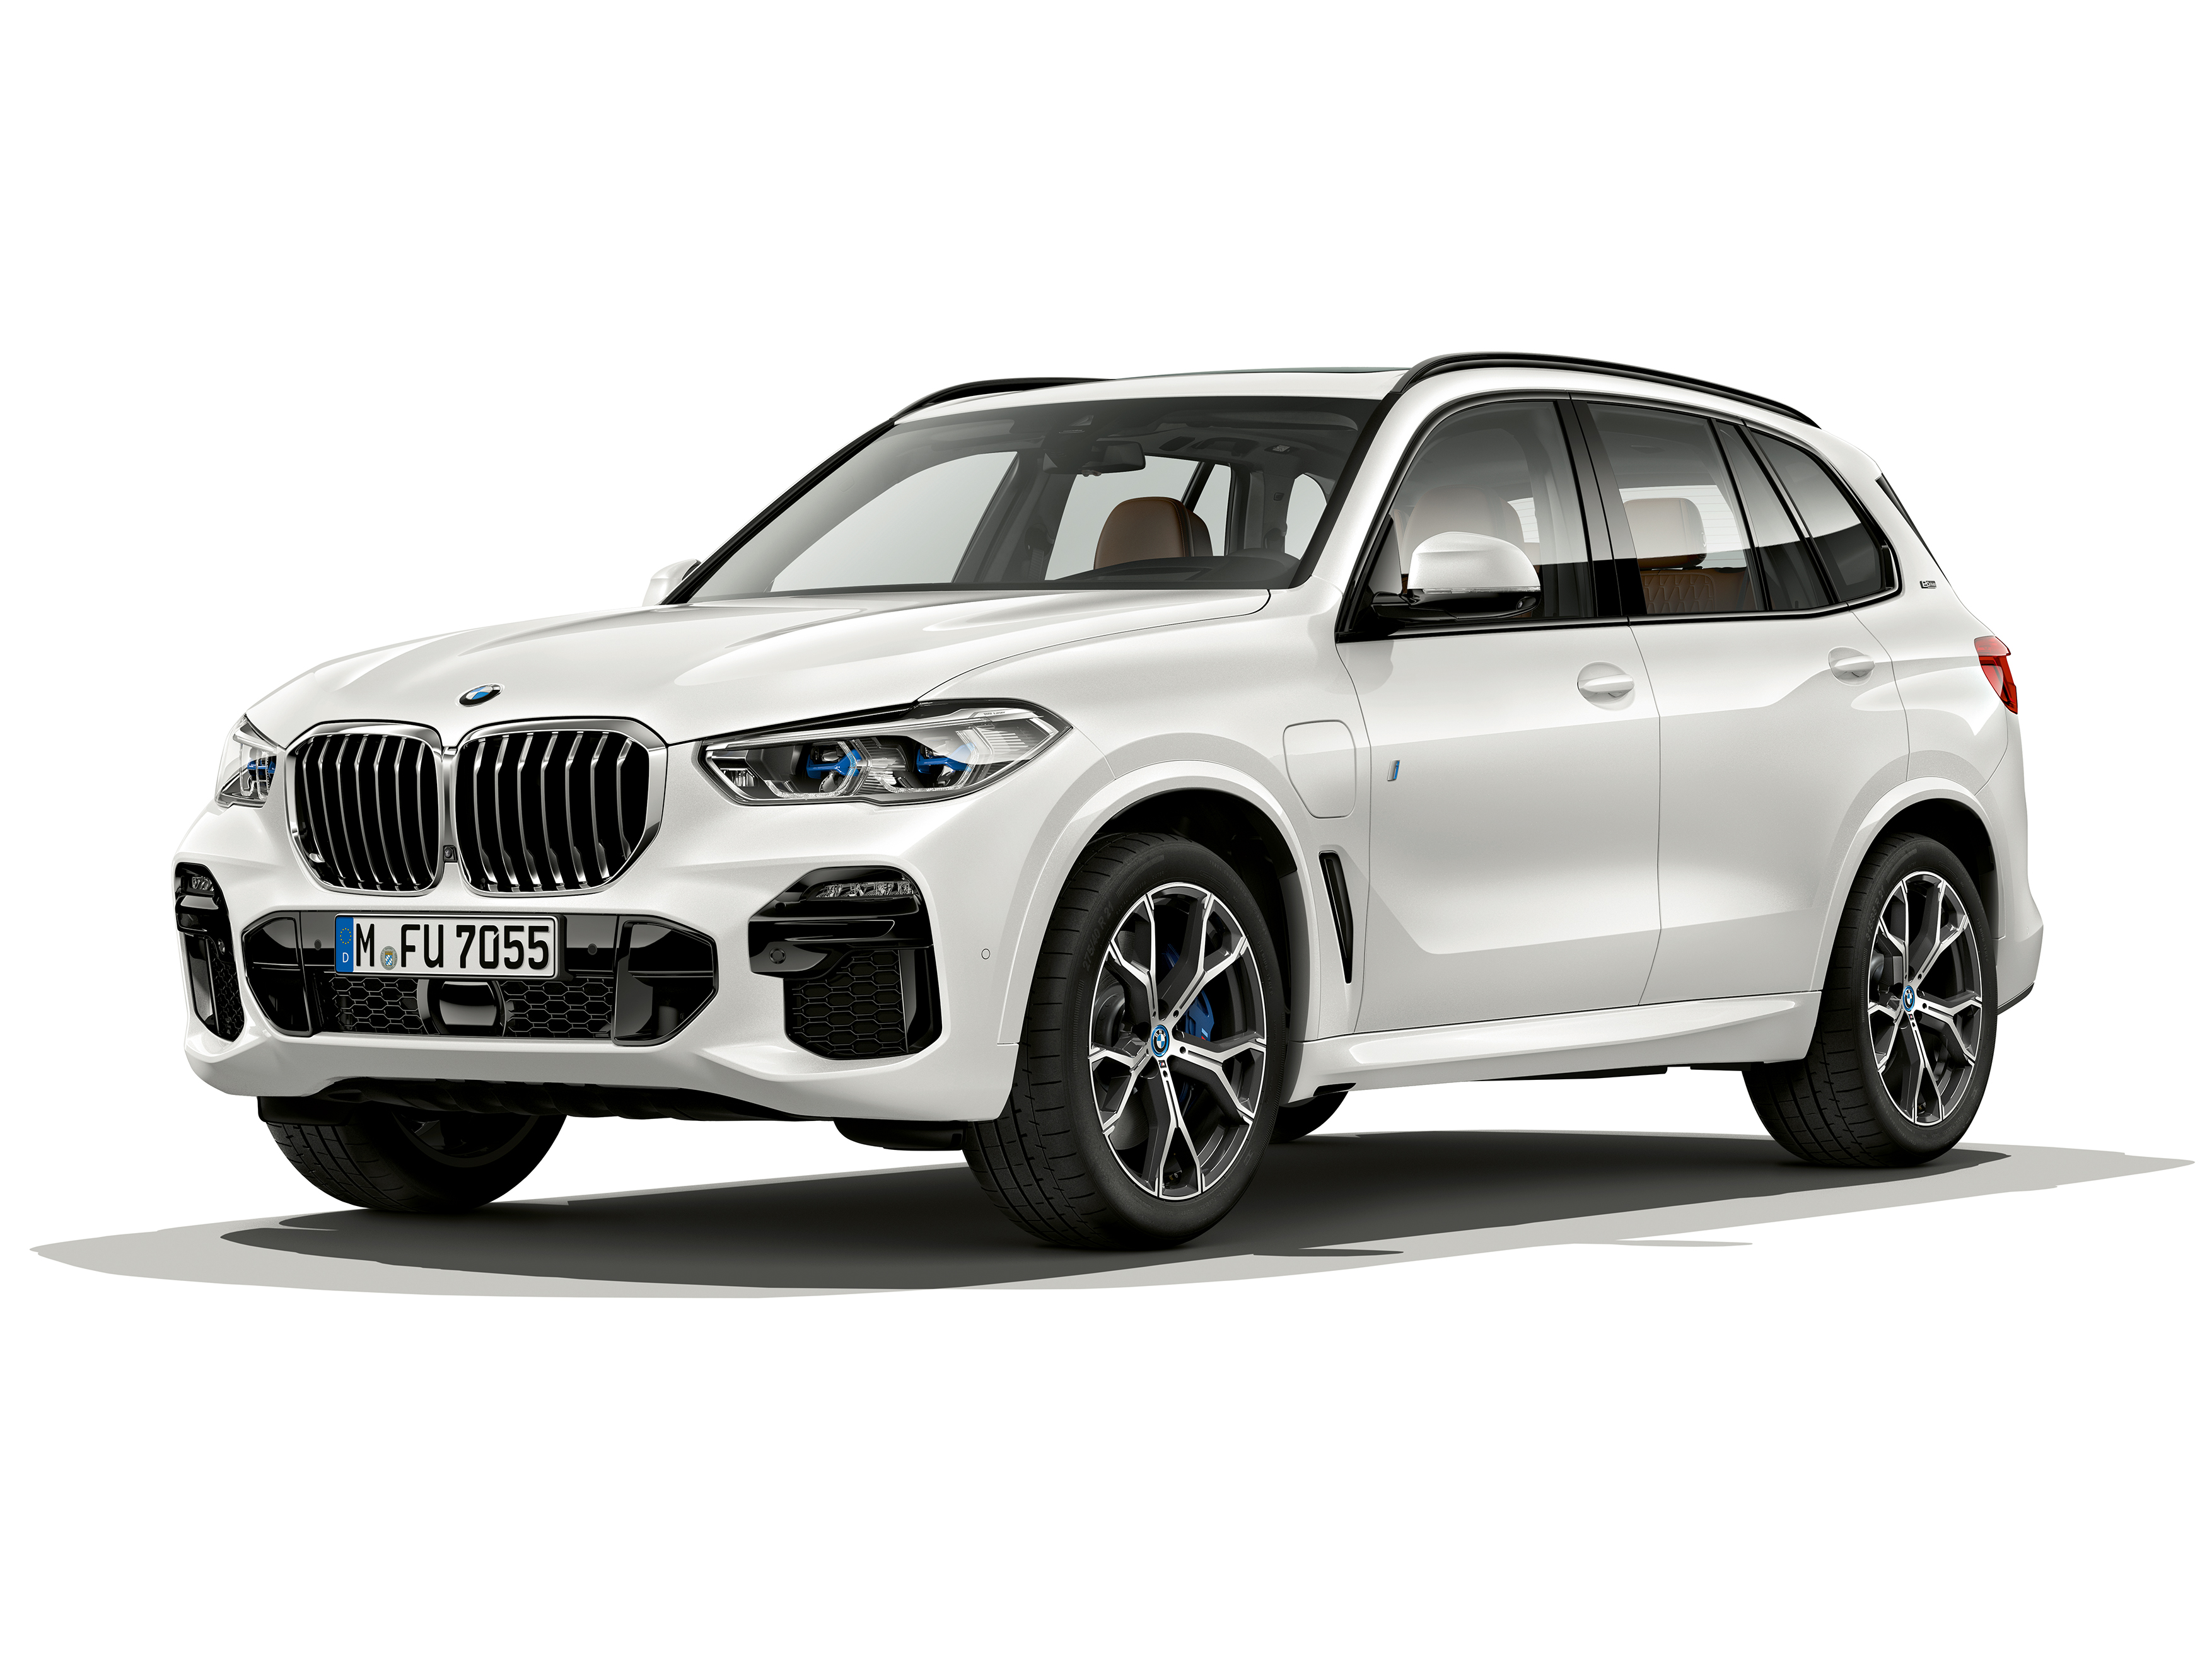 Introducing the BMW X5 xDrive45e iPerformance With 390 HP / 442 LB 